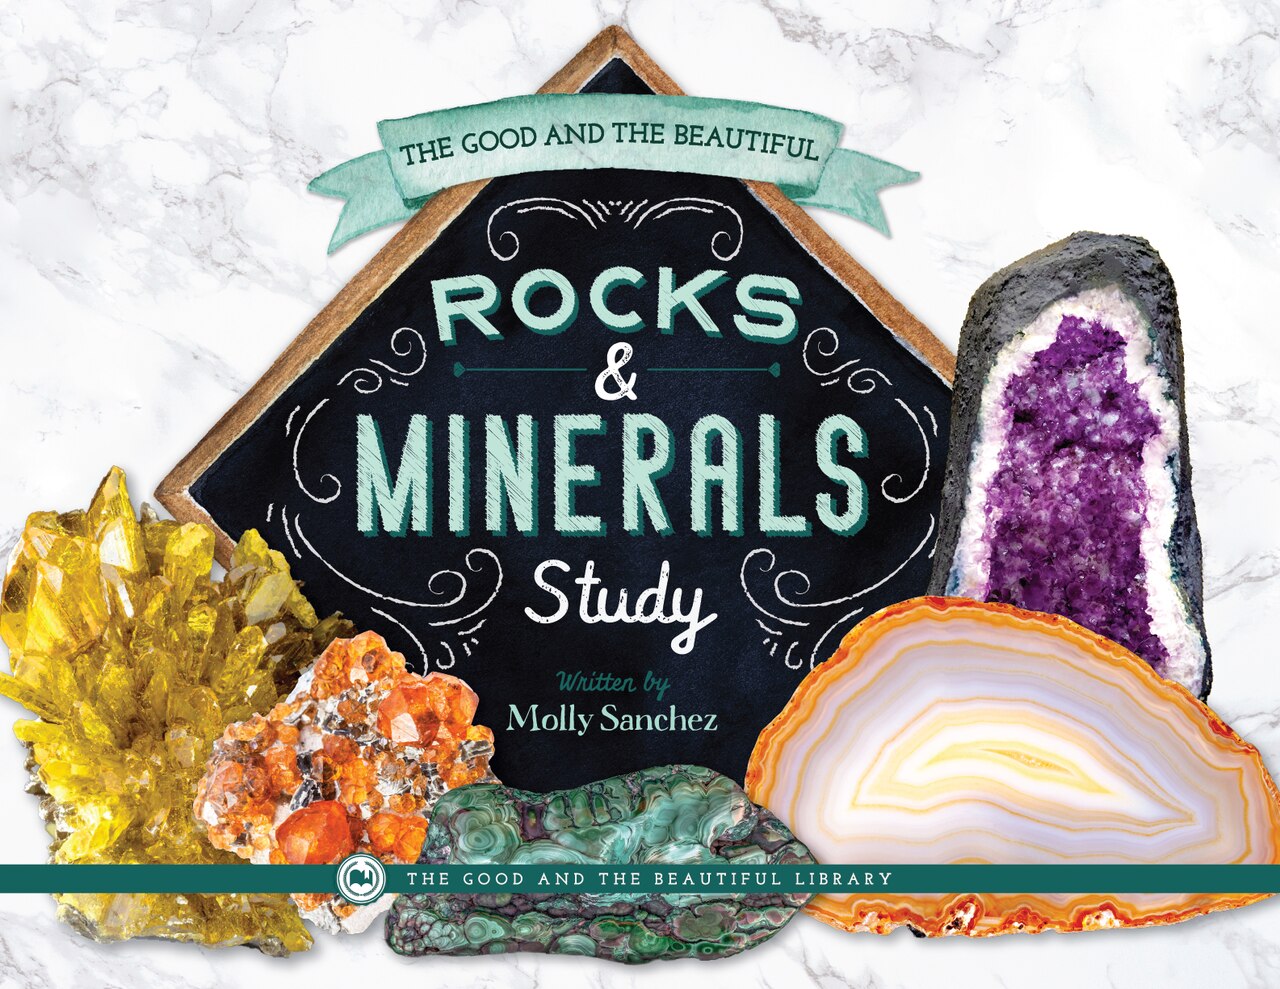 Rocks & Minerals Study Book - By Molly Sanchez - The Good and the Beautiful